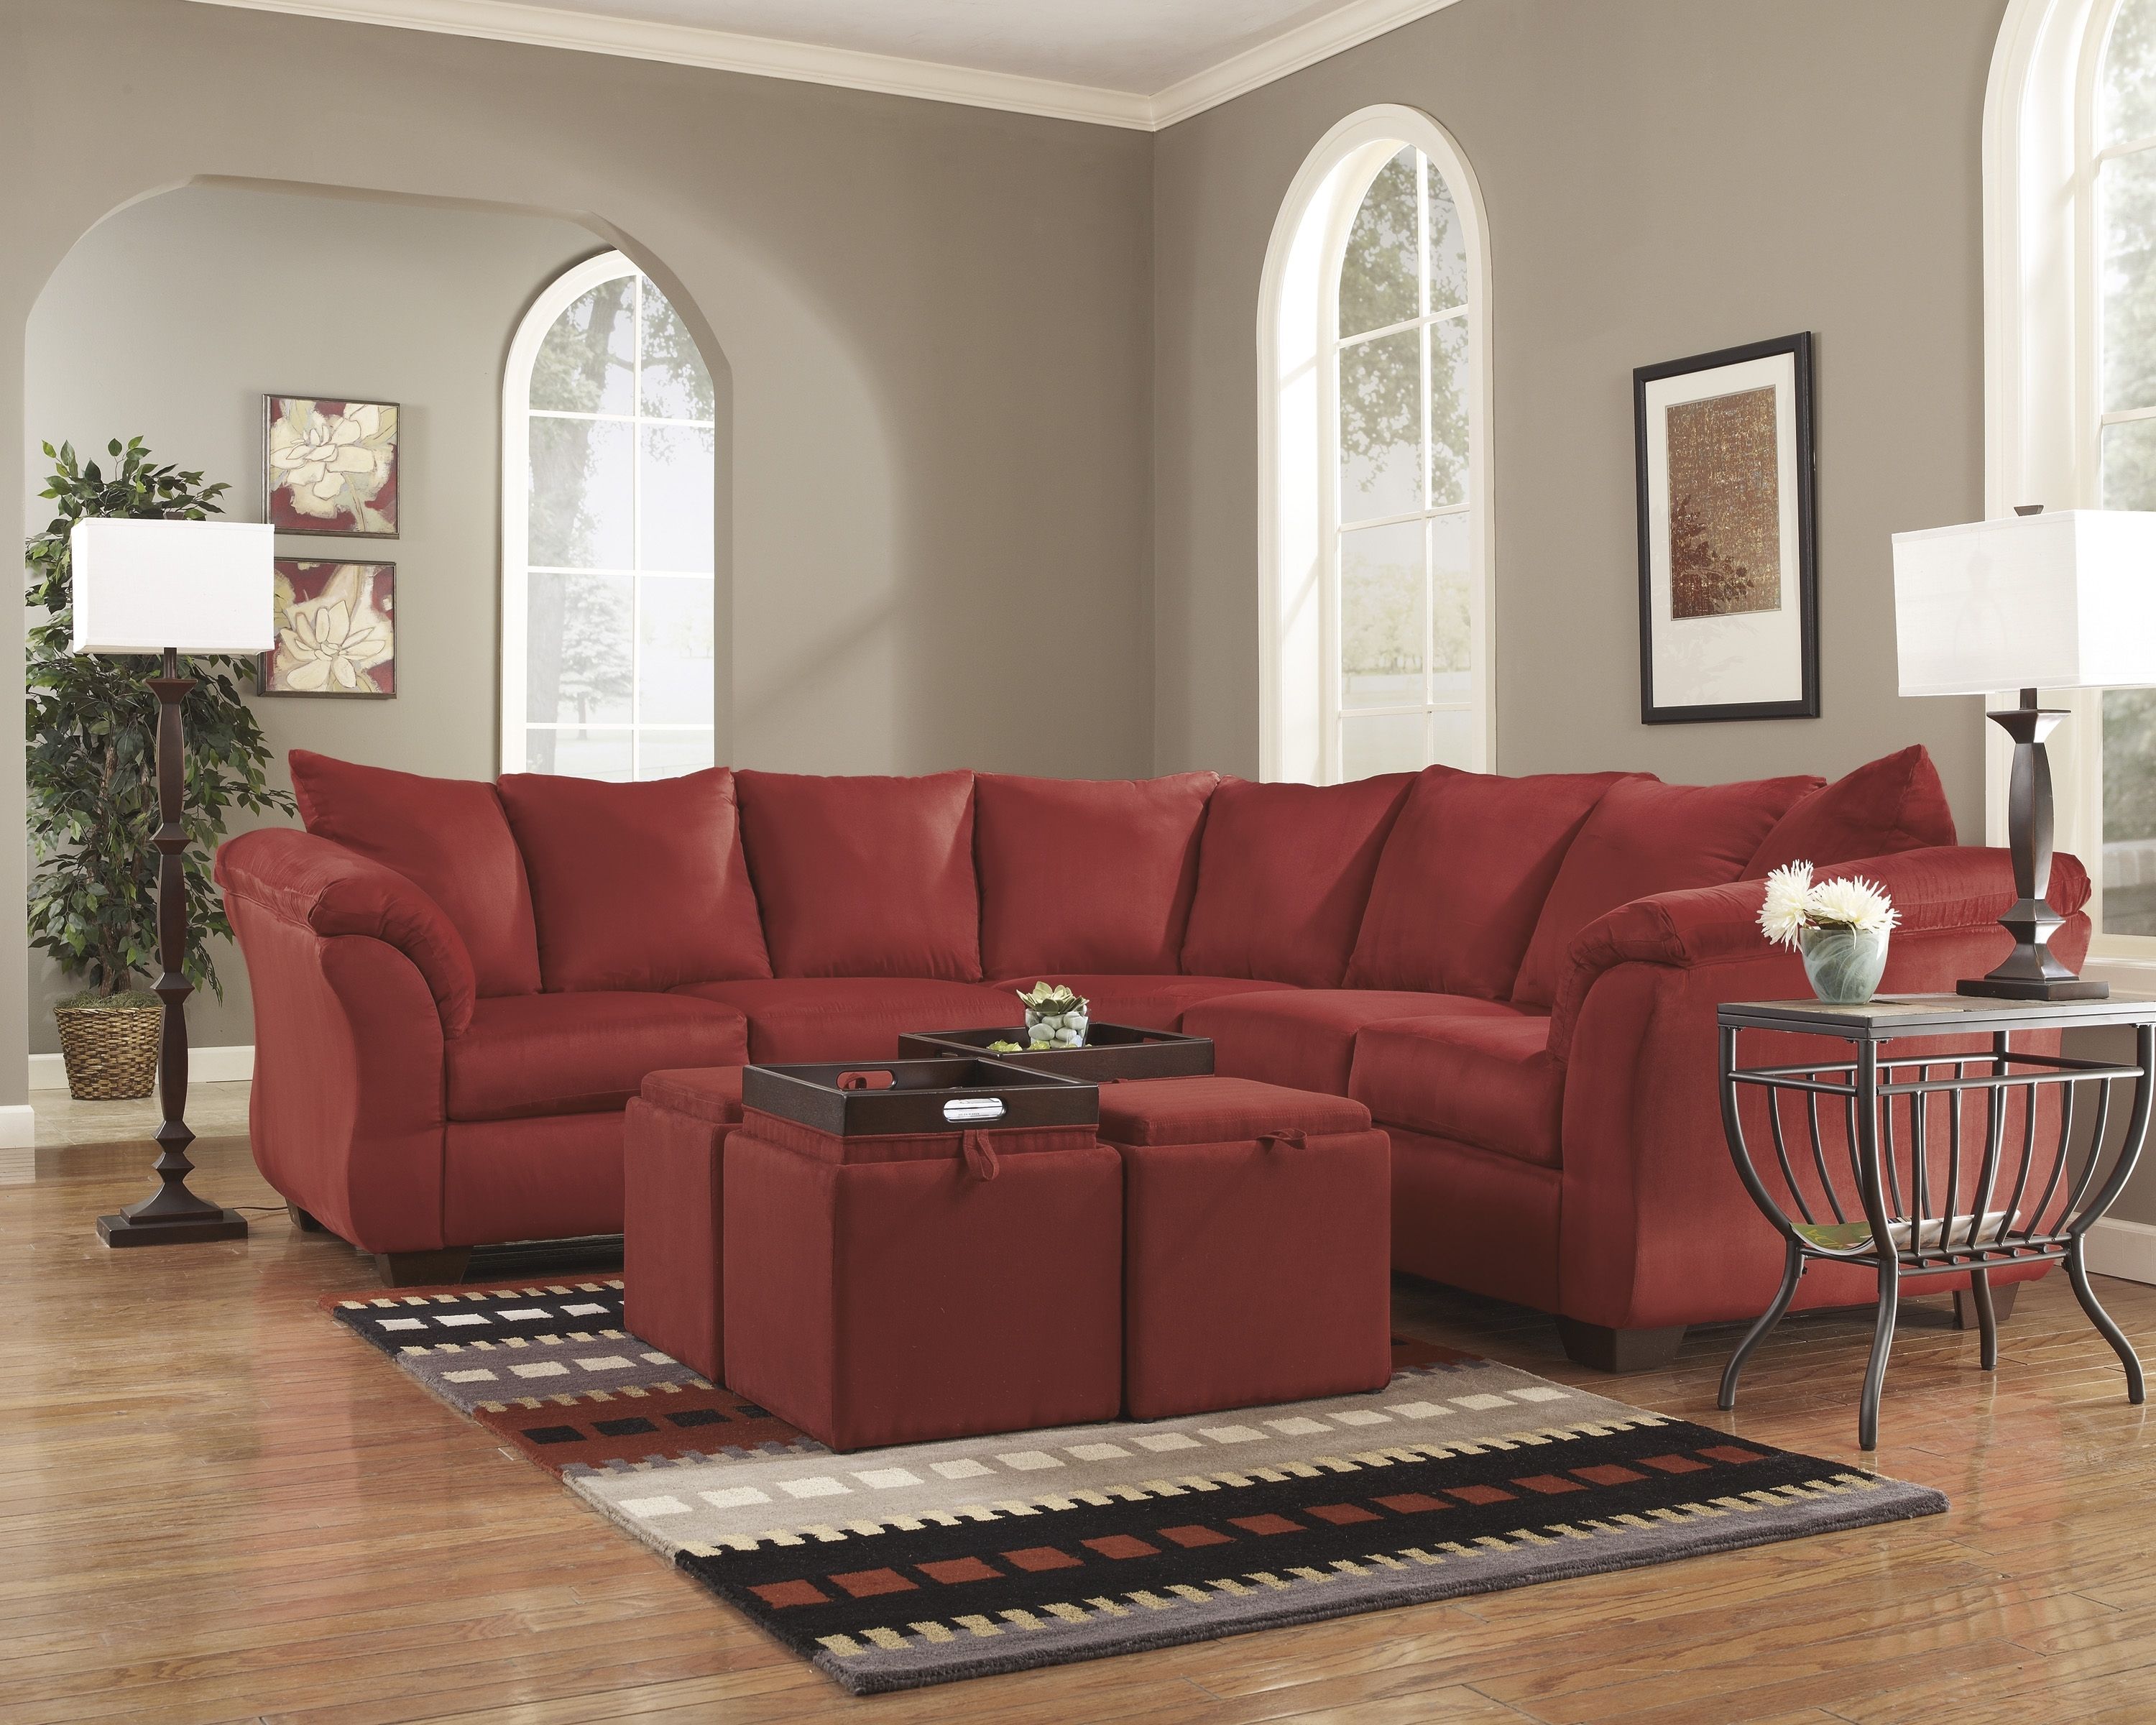 15 Ideas of Sectional Sofas at Aarons